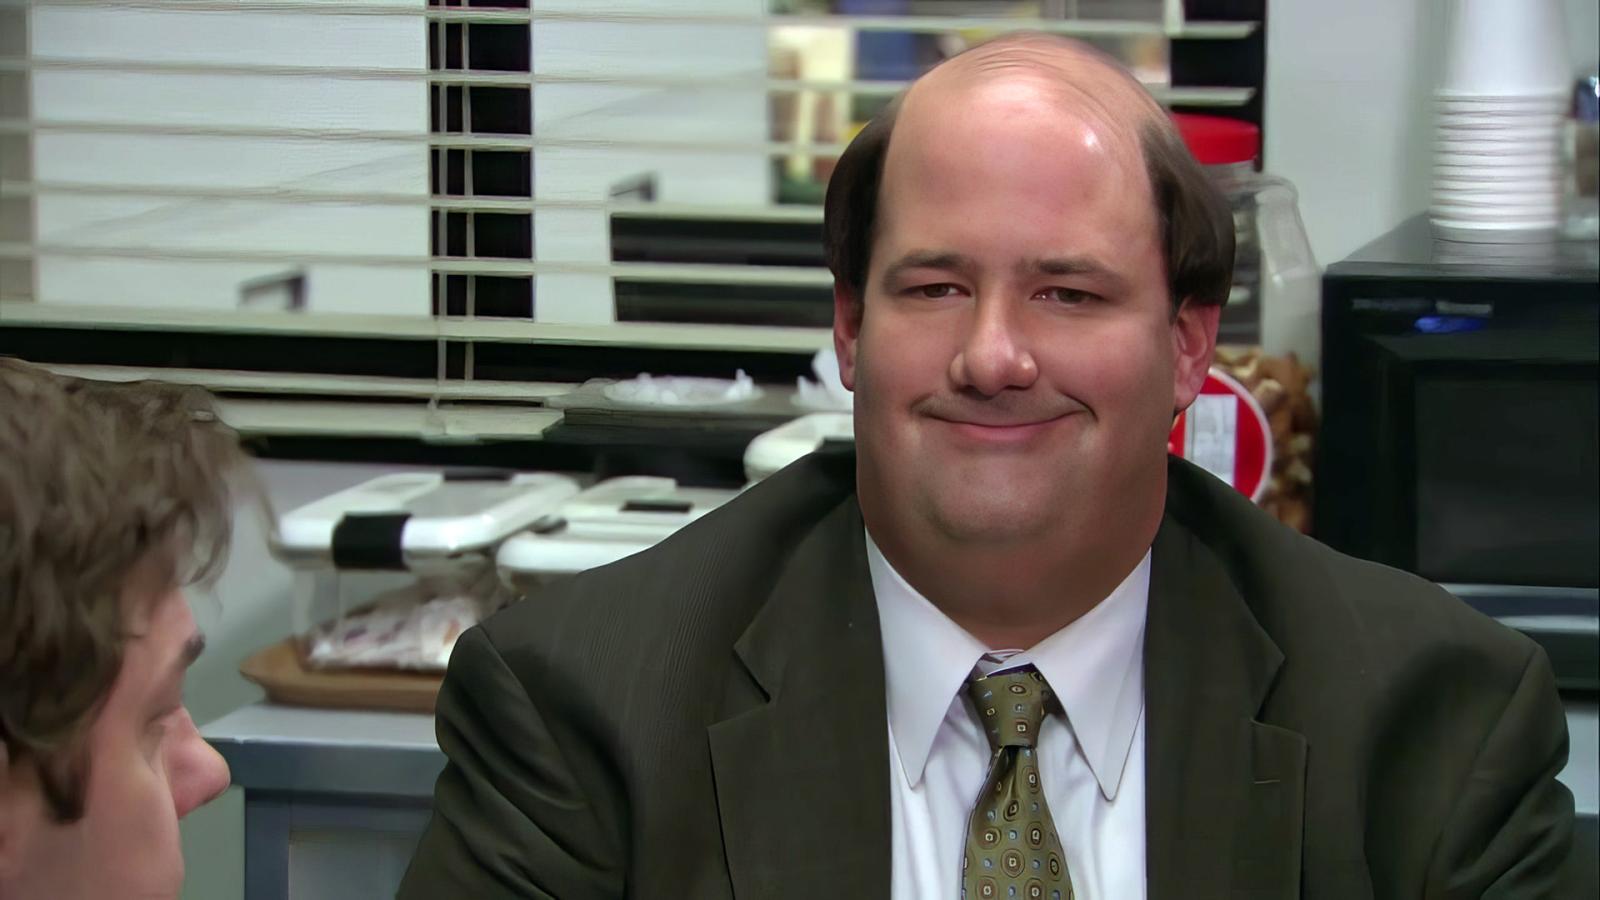 Find Out Which 'The Office' Employee You Are Based on Your Zodiac Sign - image 12